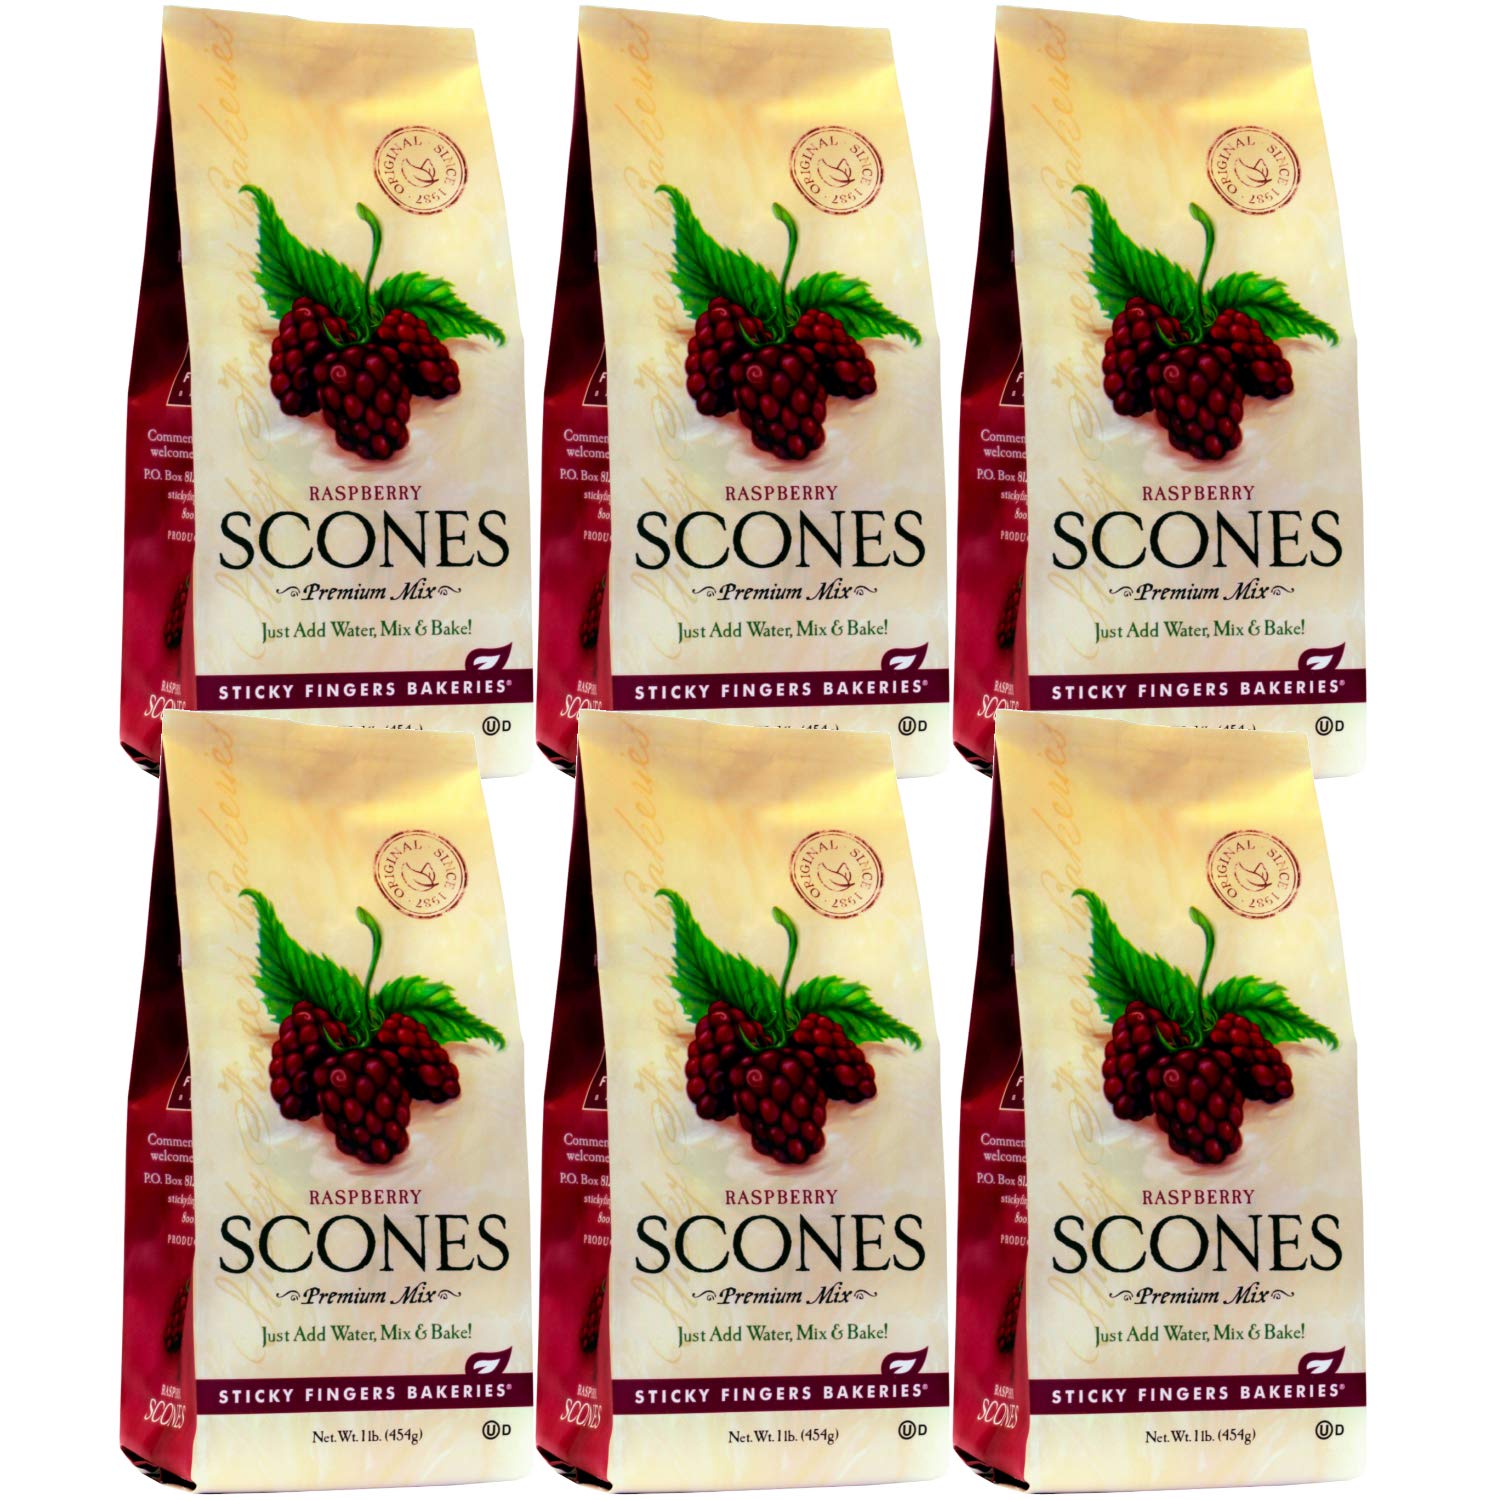 English Scone Mix with Raspberry by Sticky Fingers Bakeries – Easy to Make English Scones Fresh Baked, Makes 12 Scones (6pk)